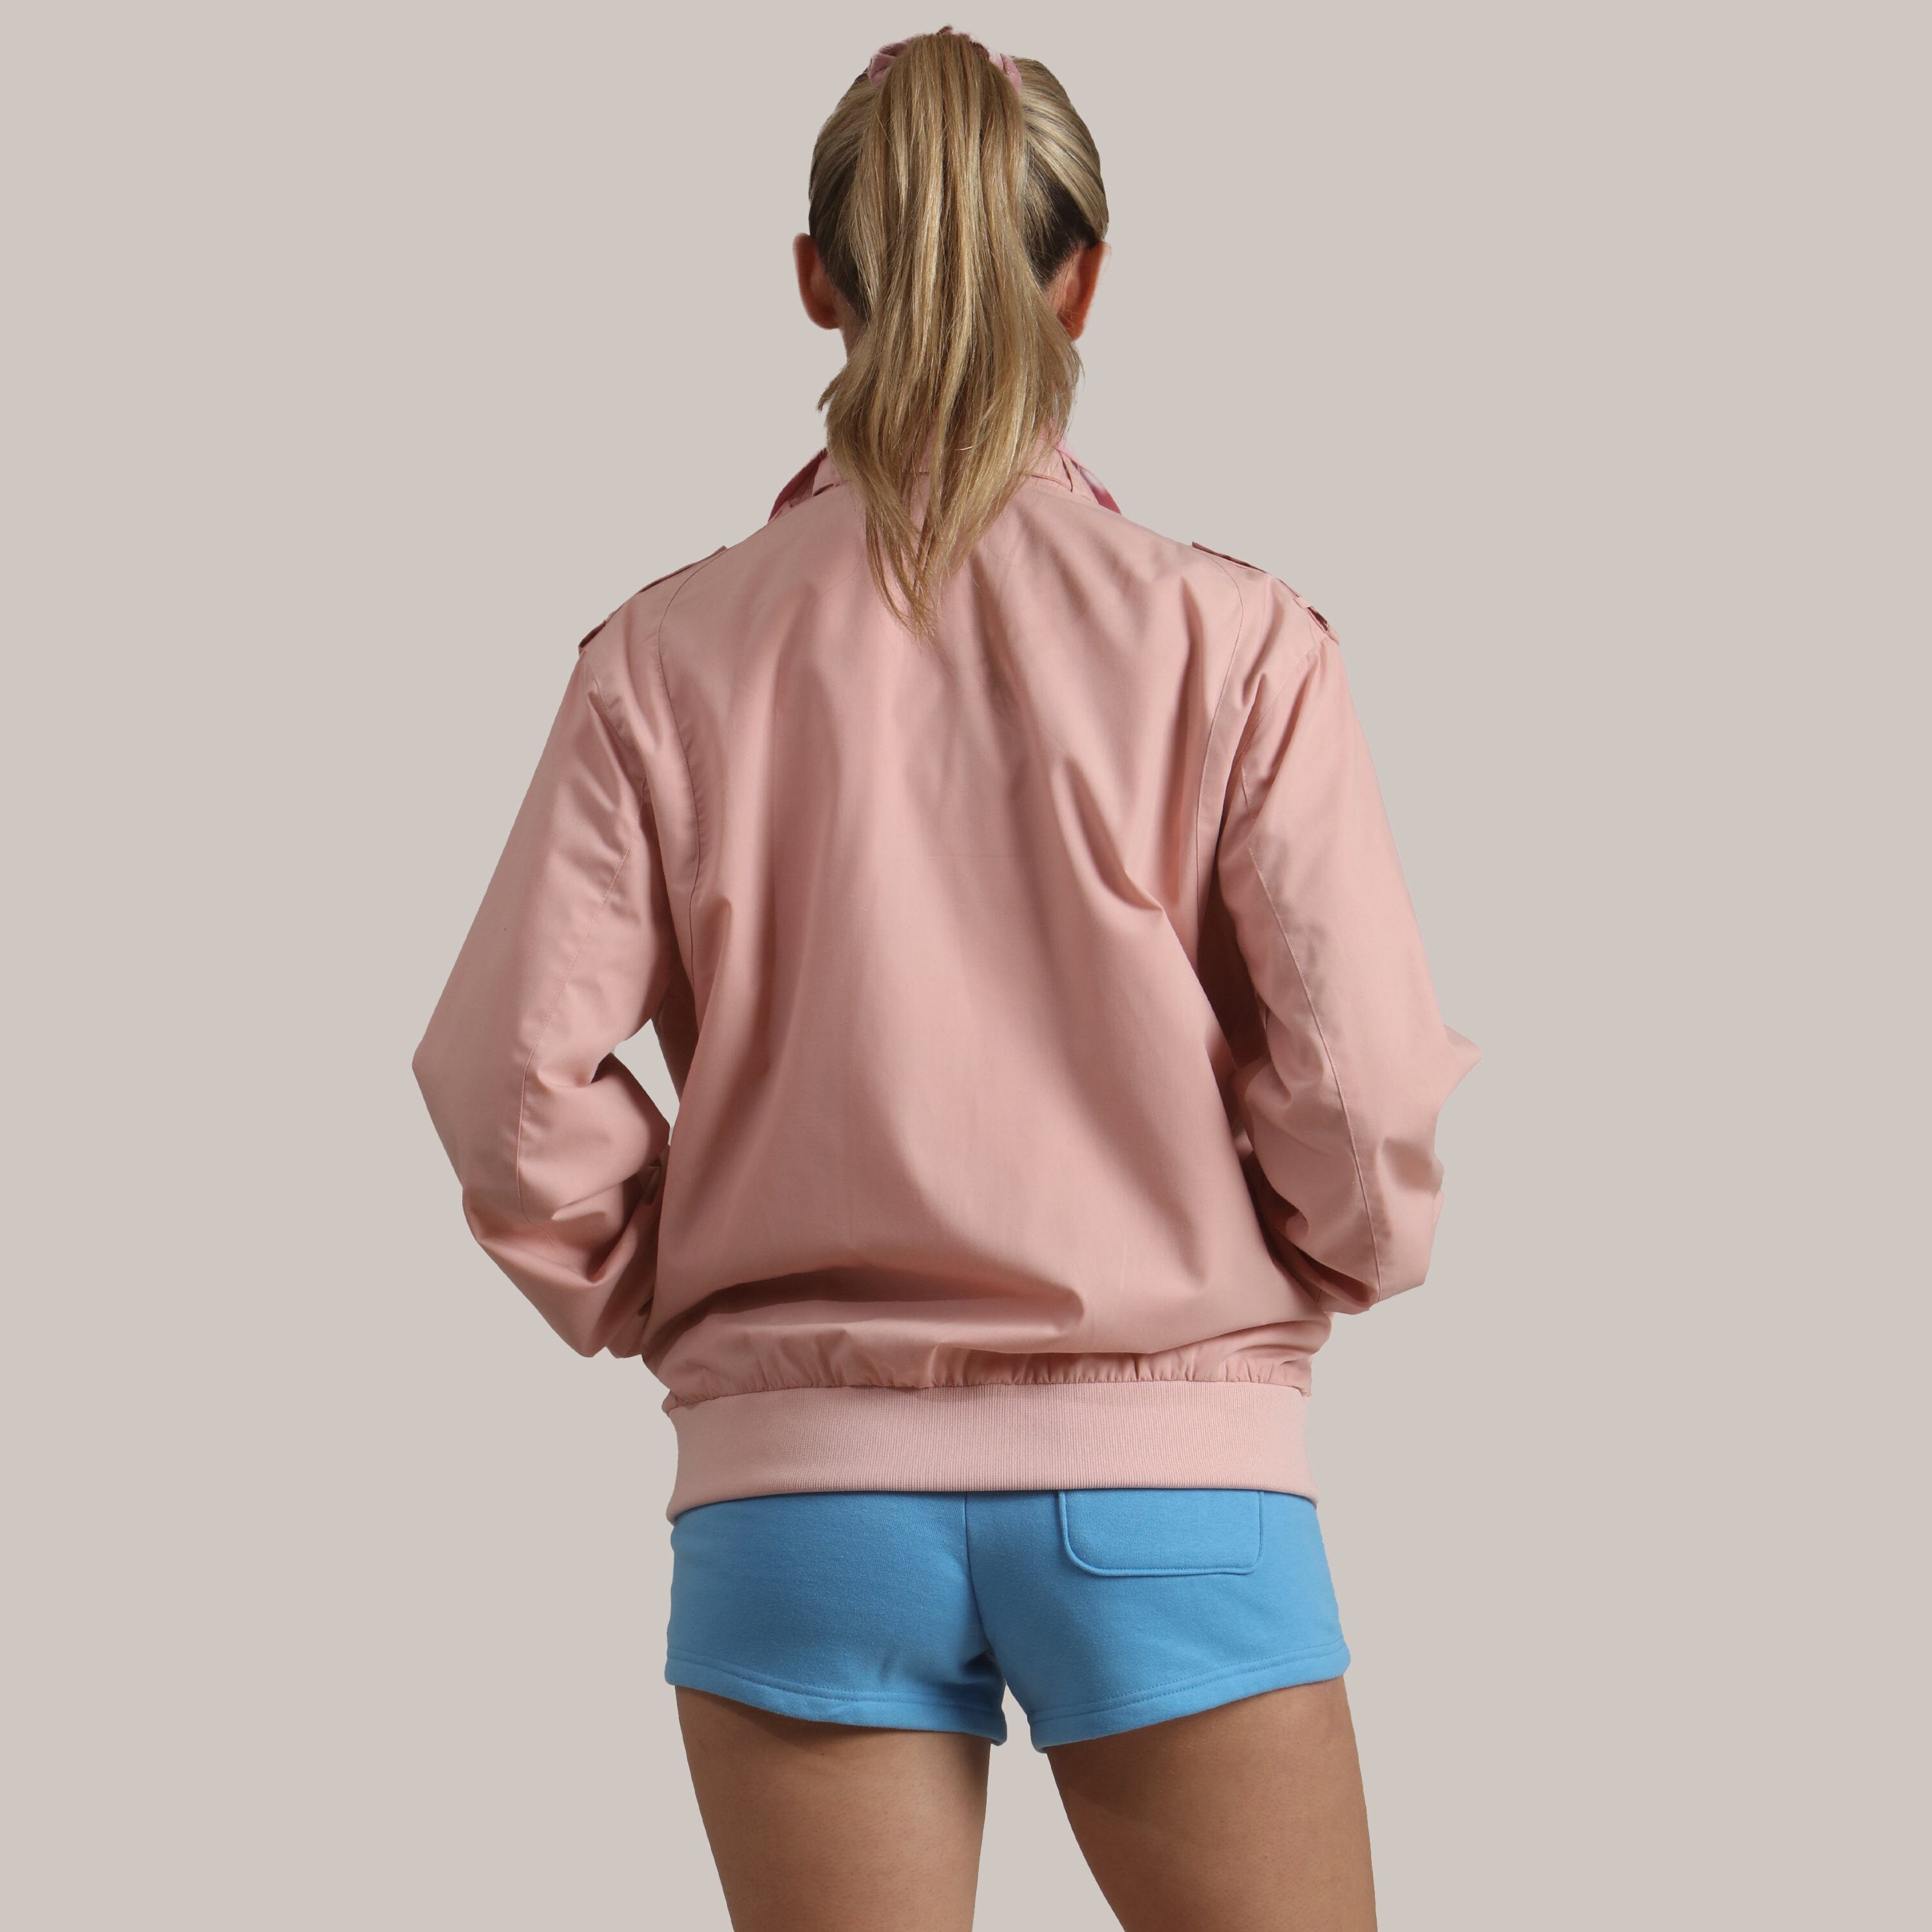 Members Only Members Only Oversized Pride Jacket - Light Pink - X-Small